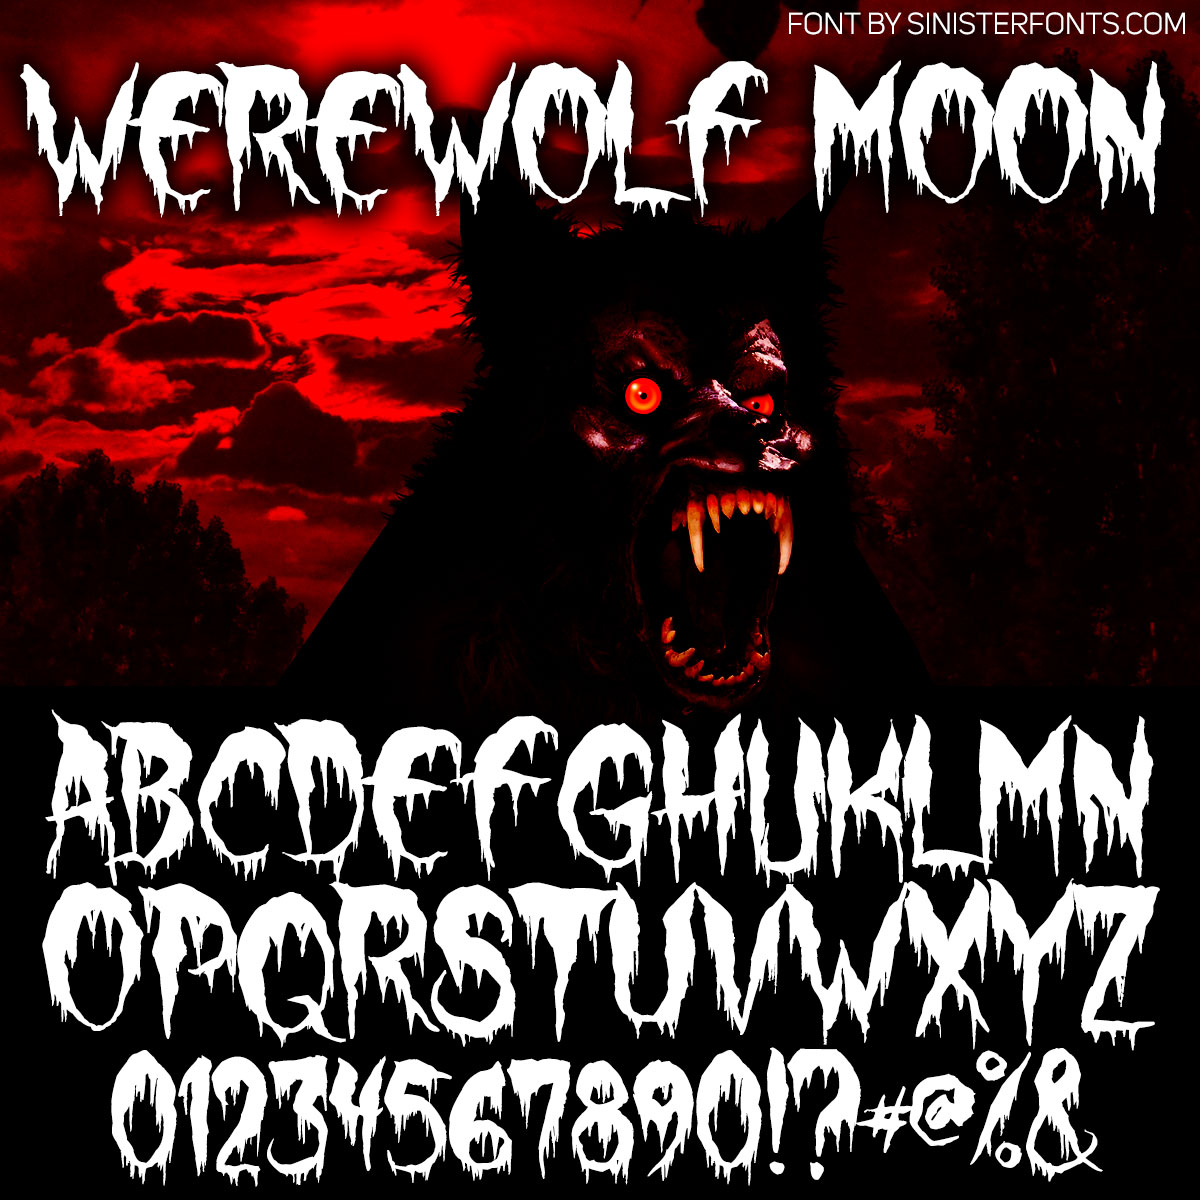 Werewolf Moon Font : Click to Download